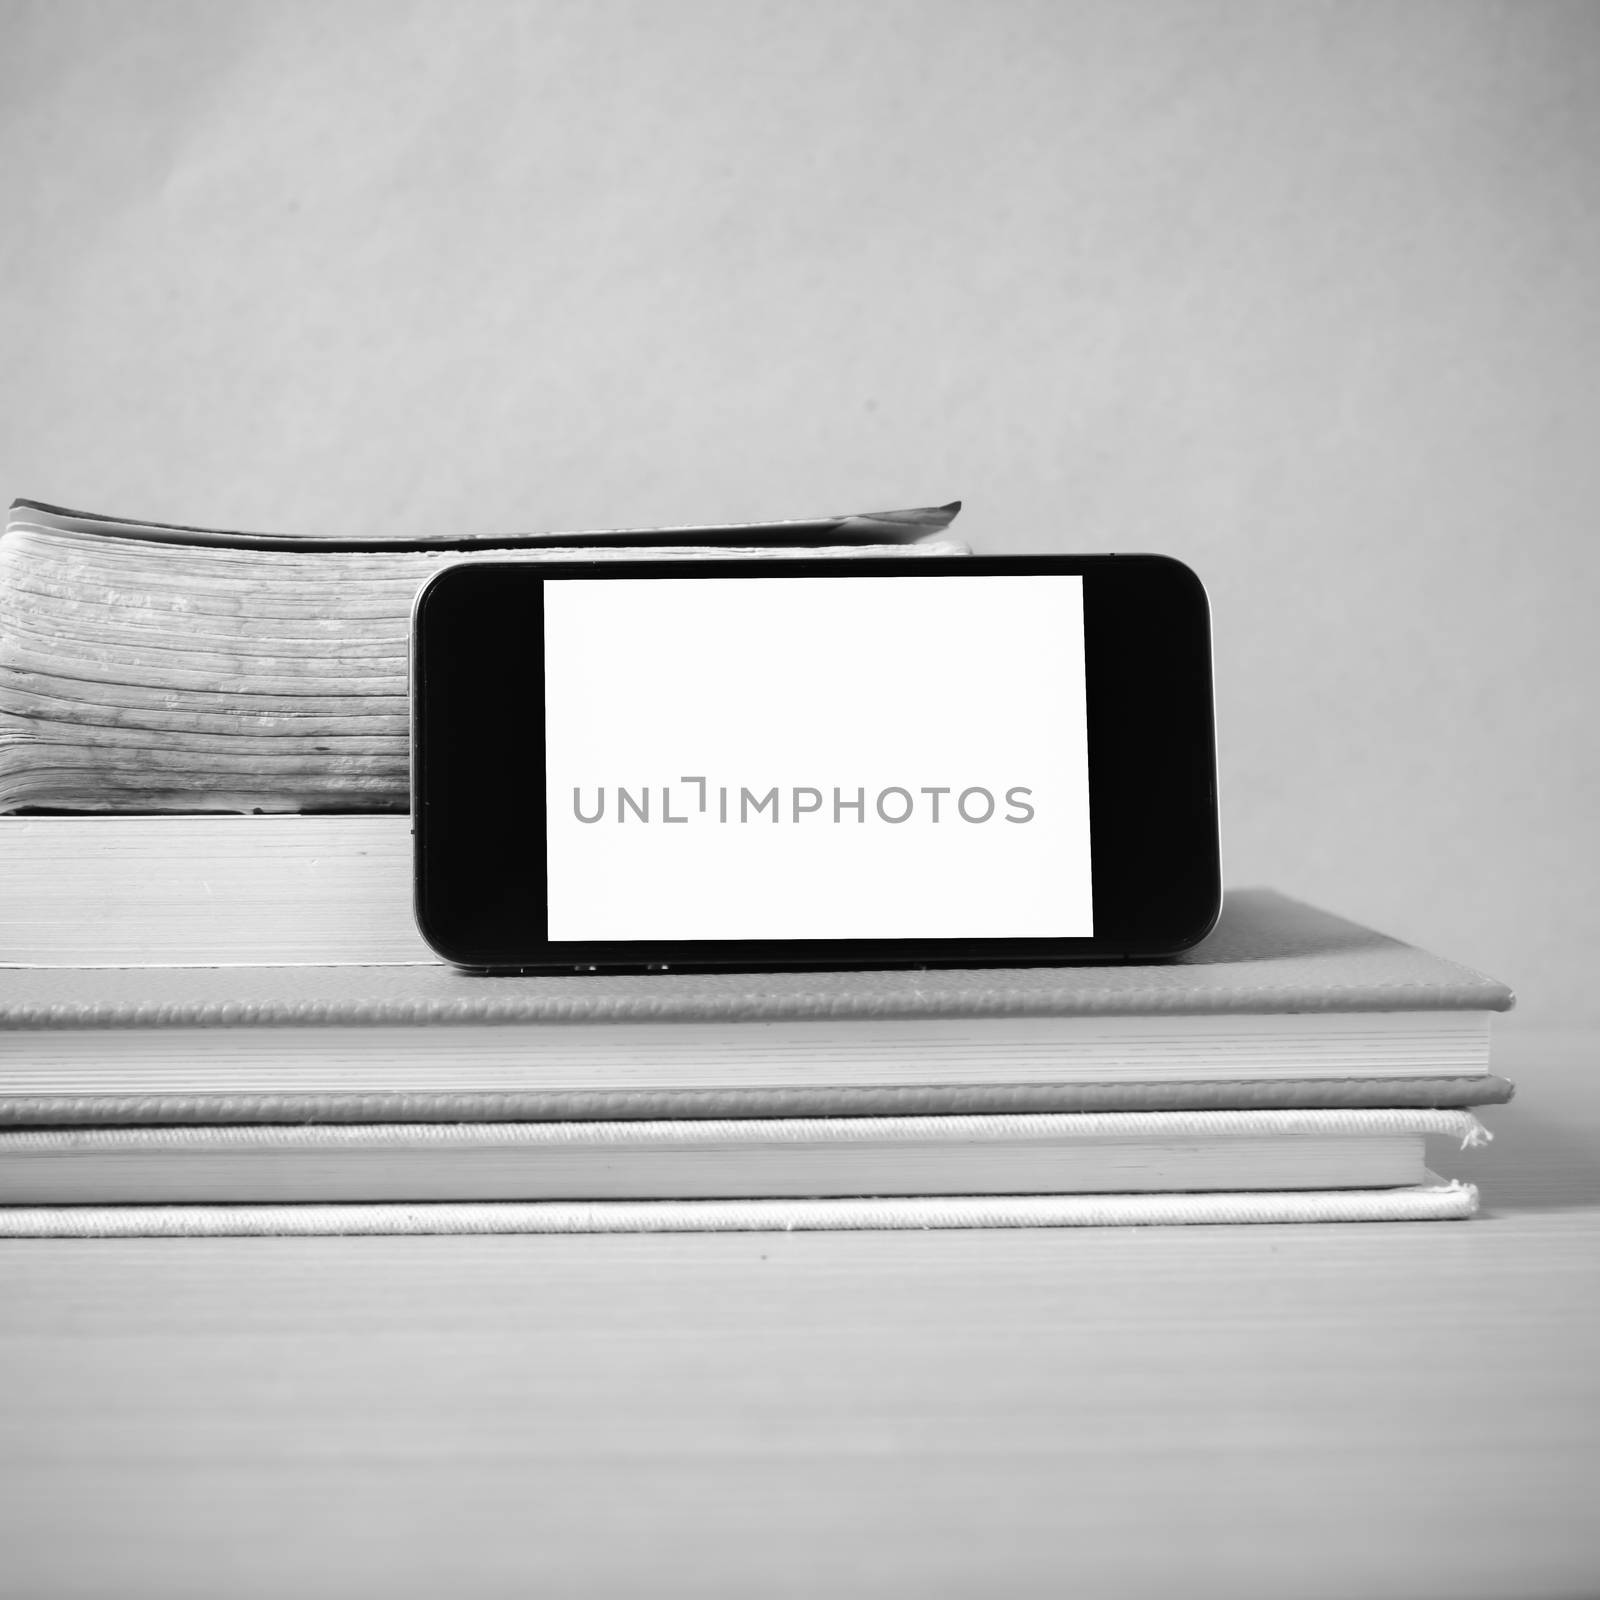 stack of book and smart phone black and white color tone style by ammza12